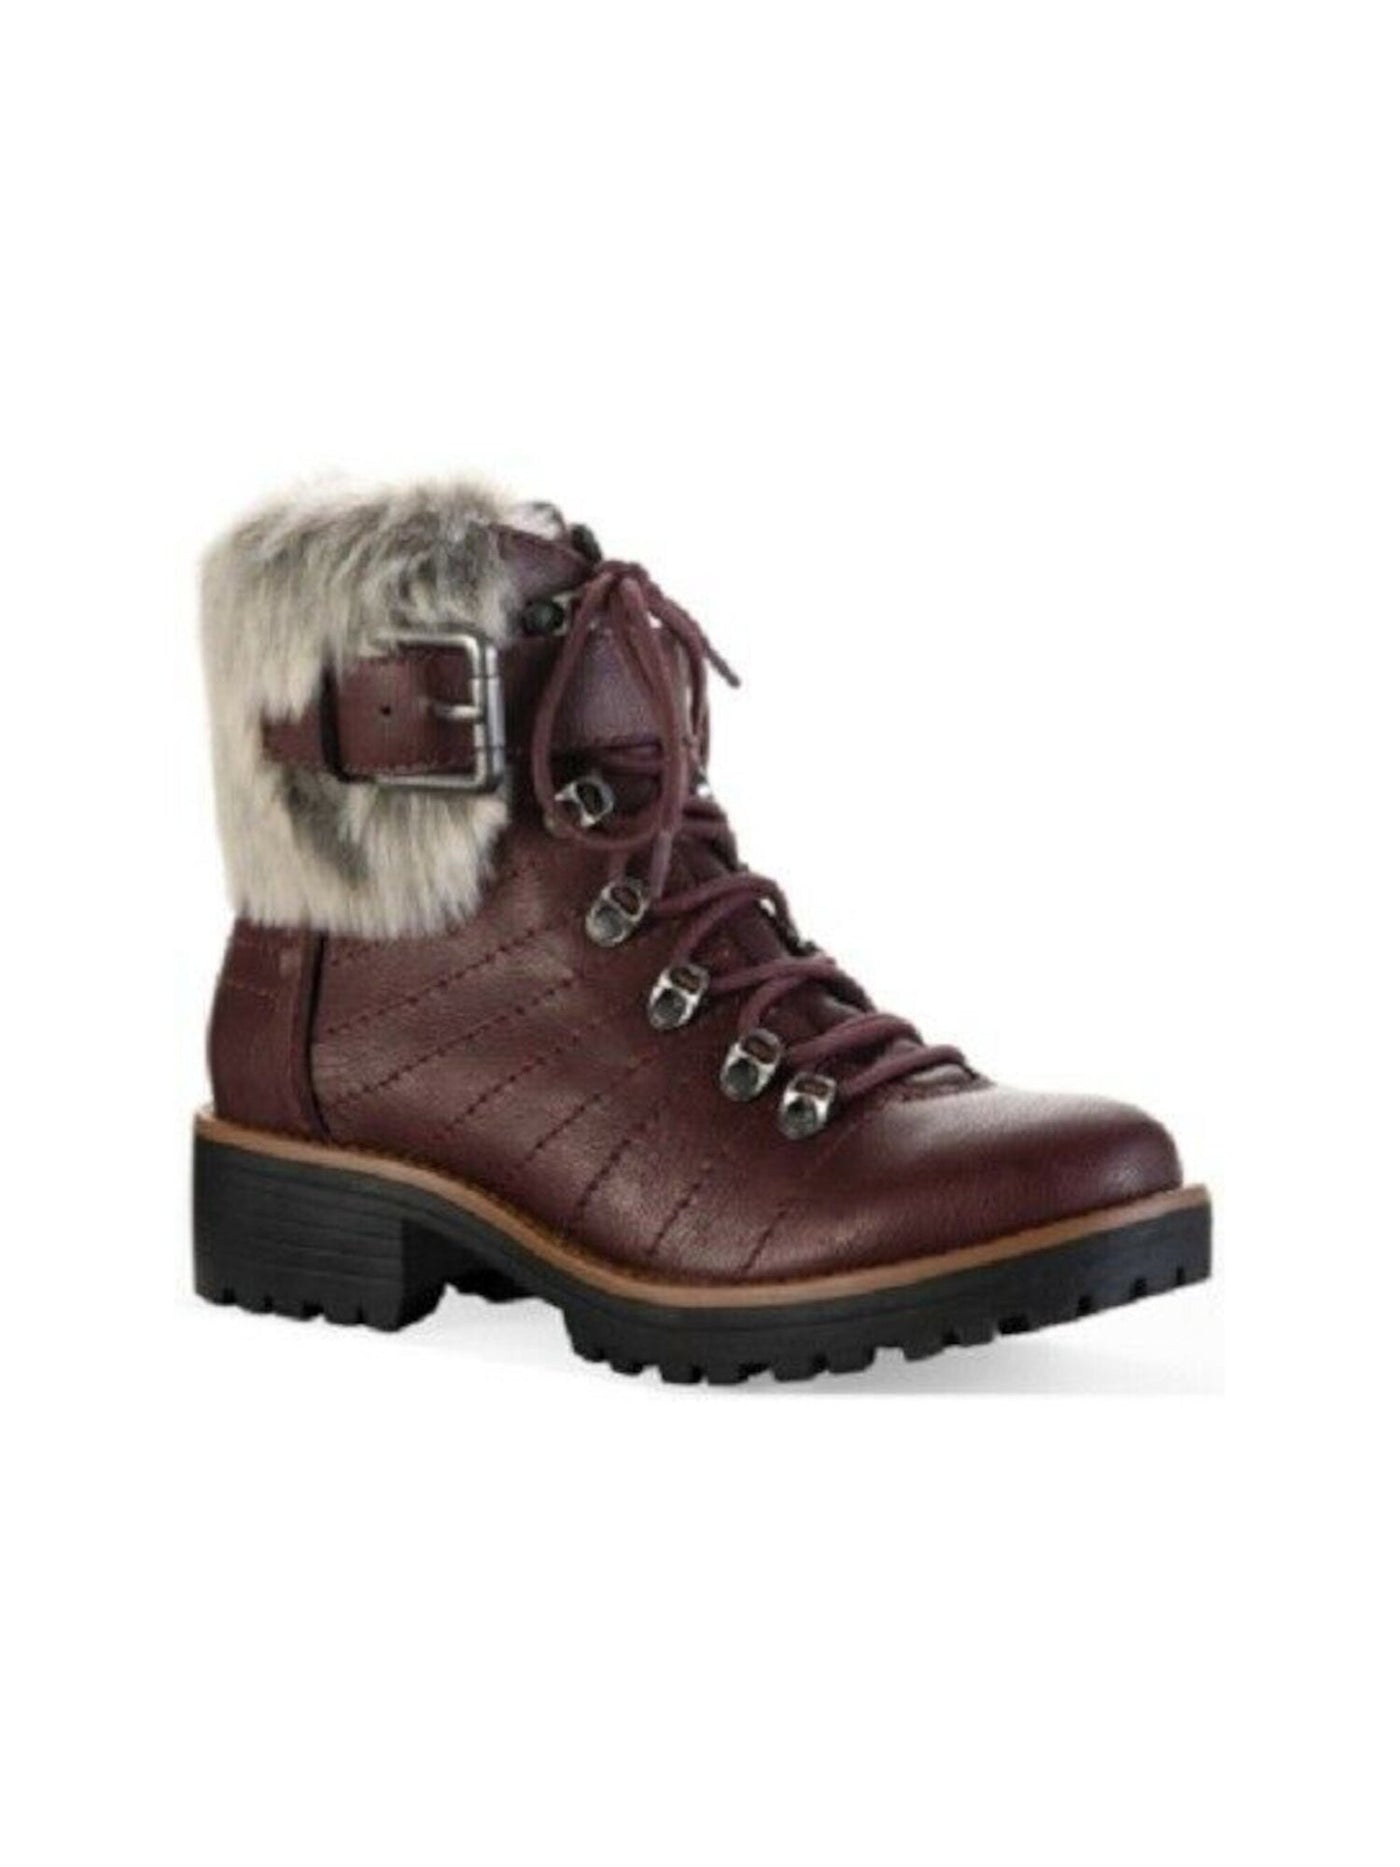 SUN STONE Womens Burgundy Ankle Strap Buckle Detail Remova Cushioned Jojo Round Toe Block Heel Lace-Up Snow Boots 8.5